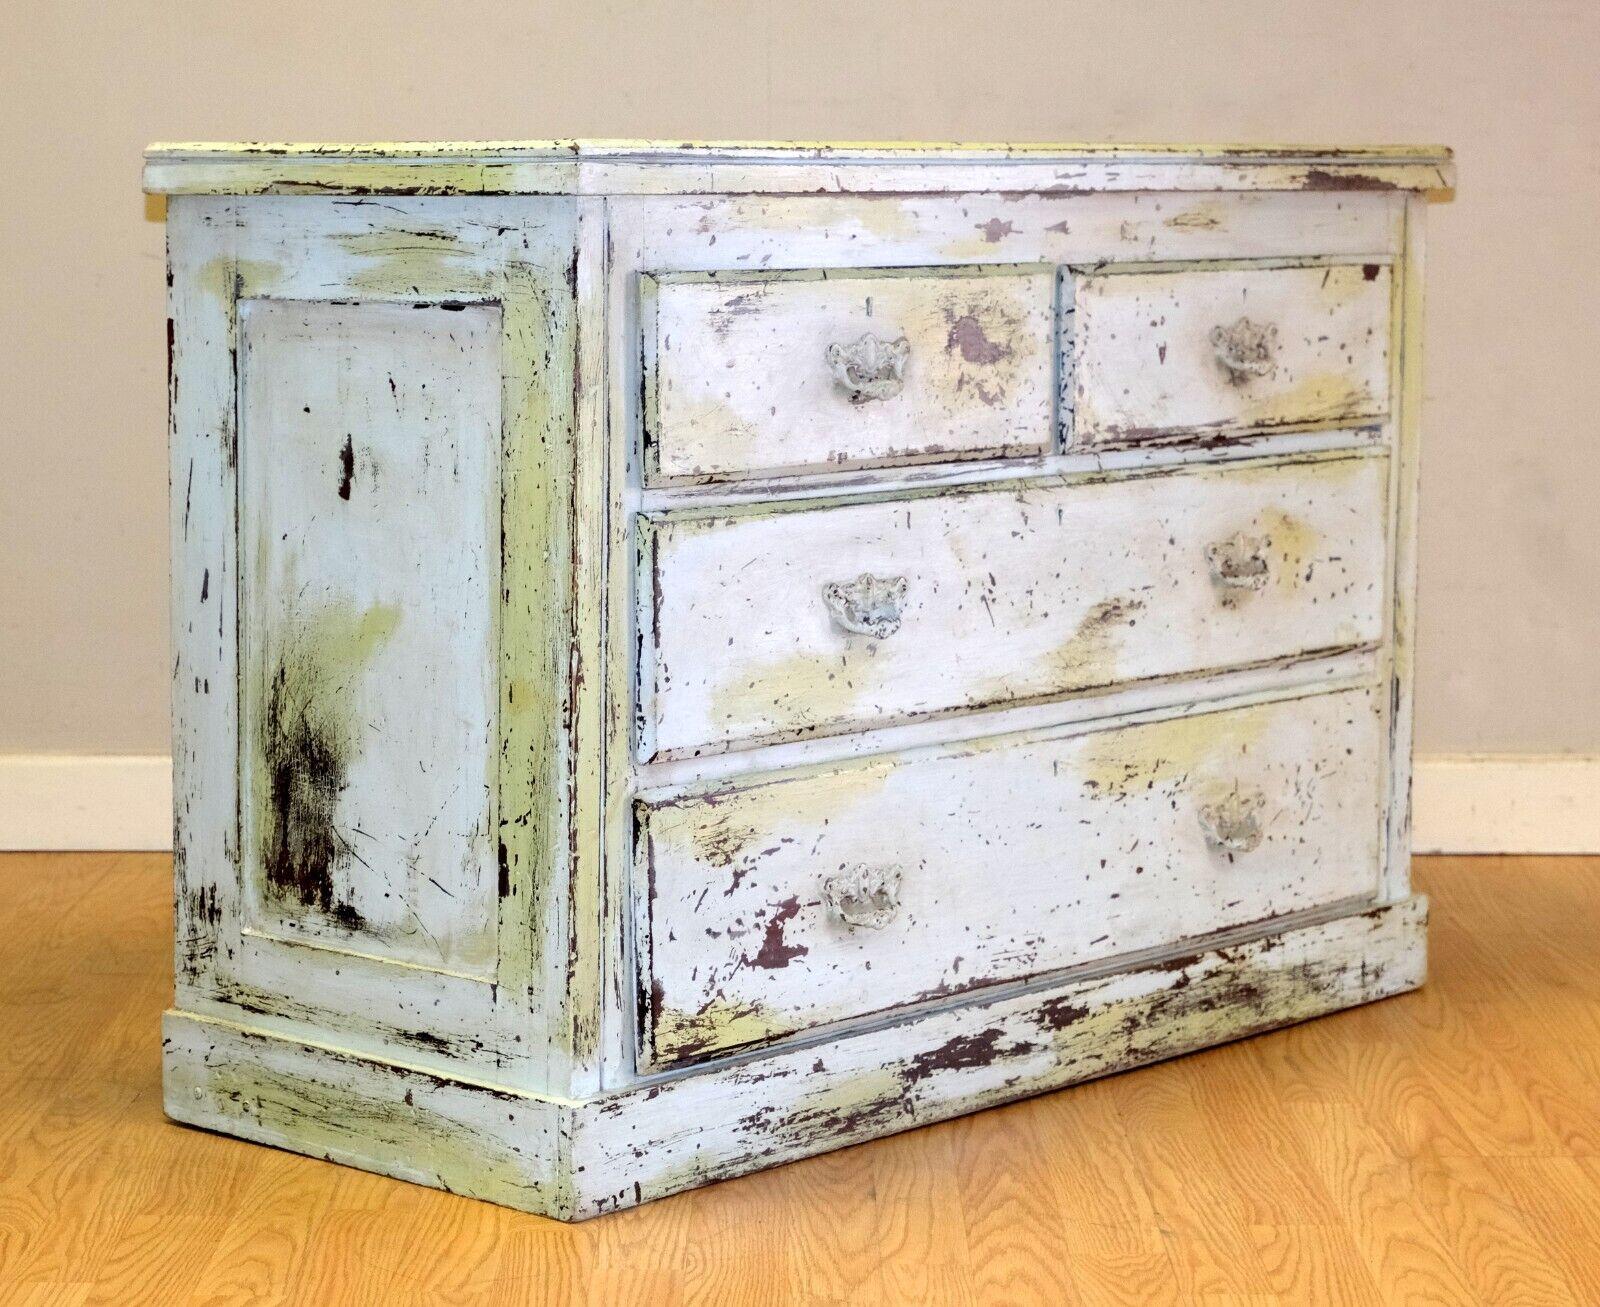 We are delighted to offer for sale this charming Antique Victorian French painted chest of drawers with lovely handles.

This beautiful piece has a lot of character and charm with its original, rustic appeal that is so desirable. The chest has